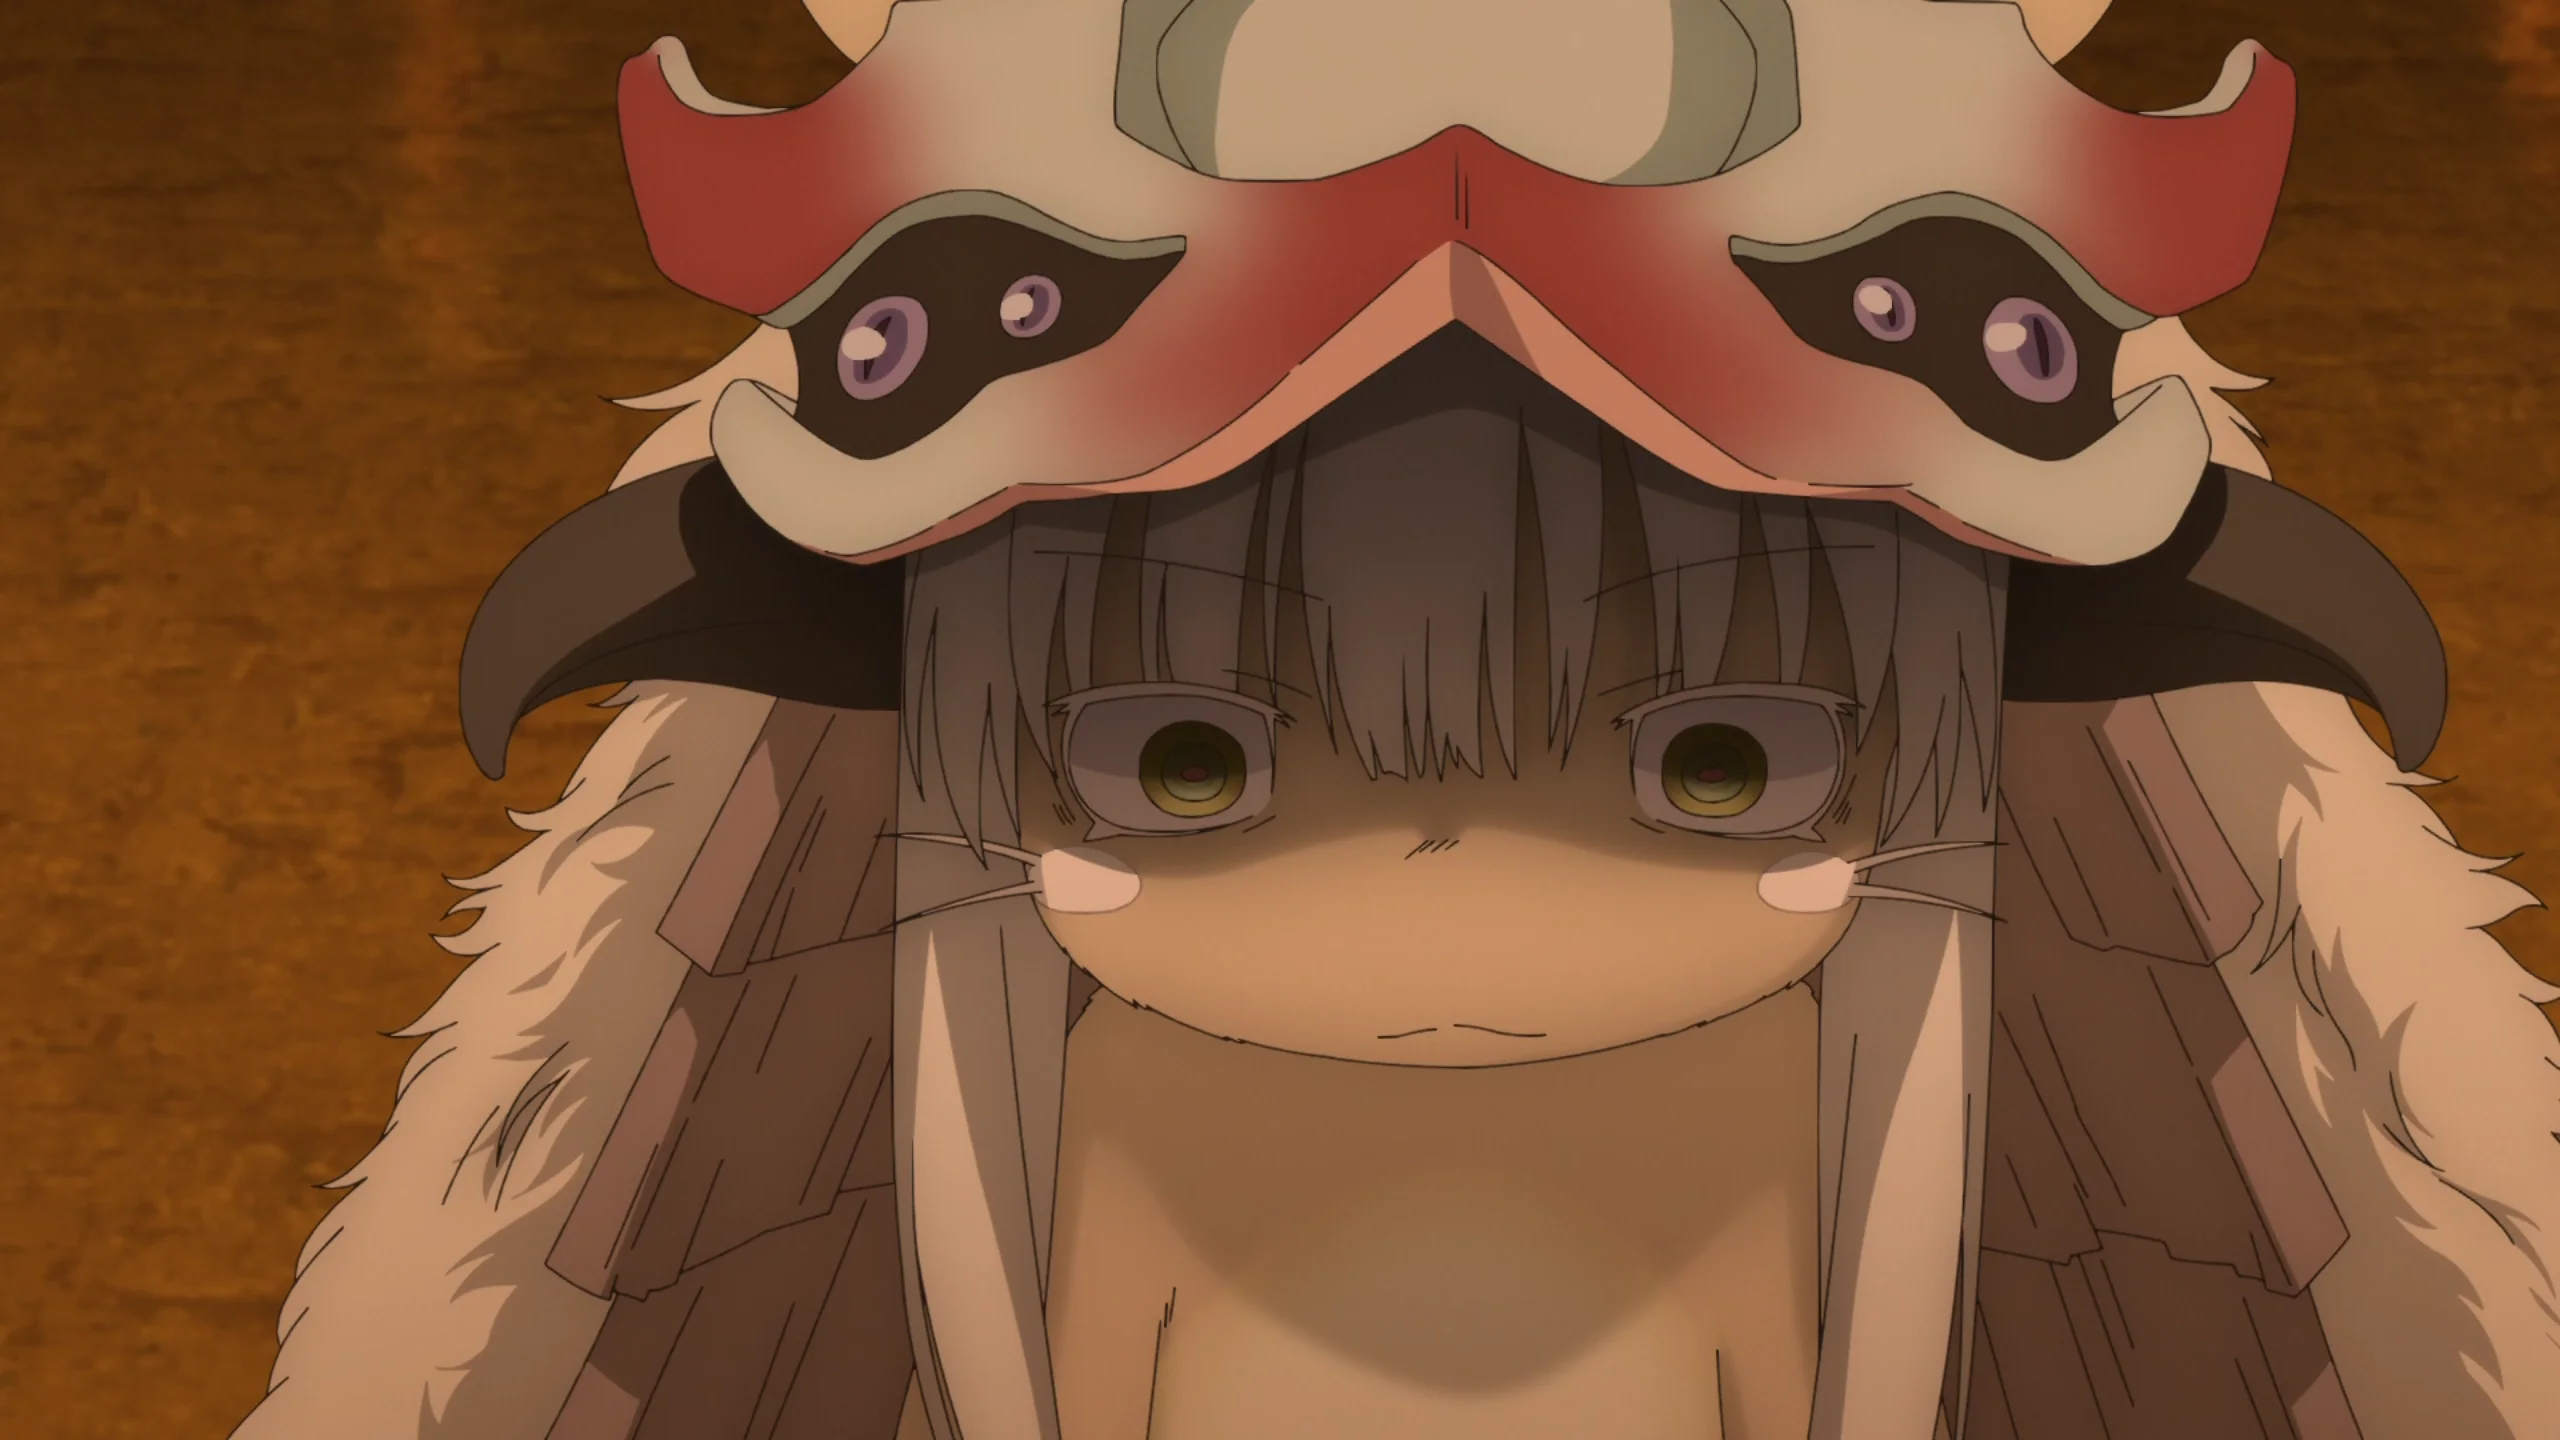 Made in Abyss (Opening) on Vimeo